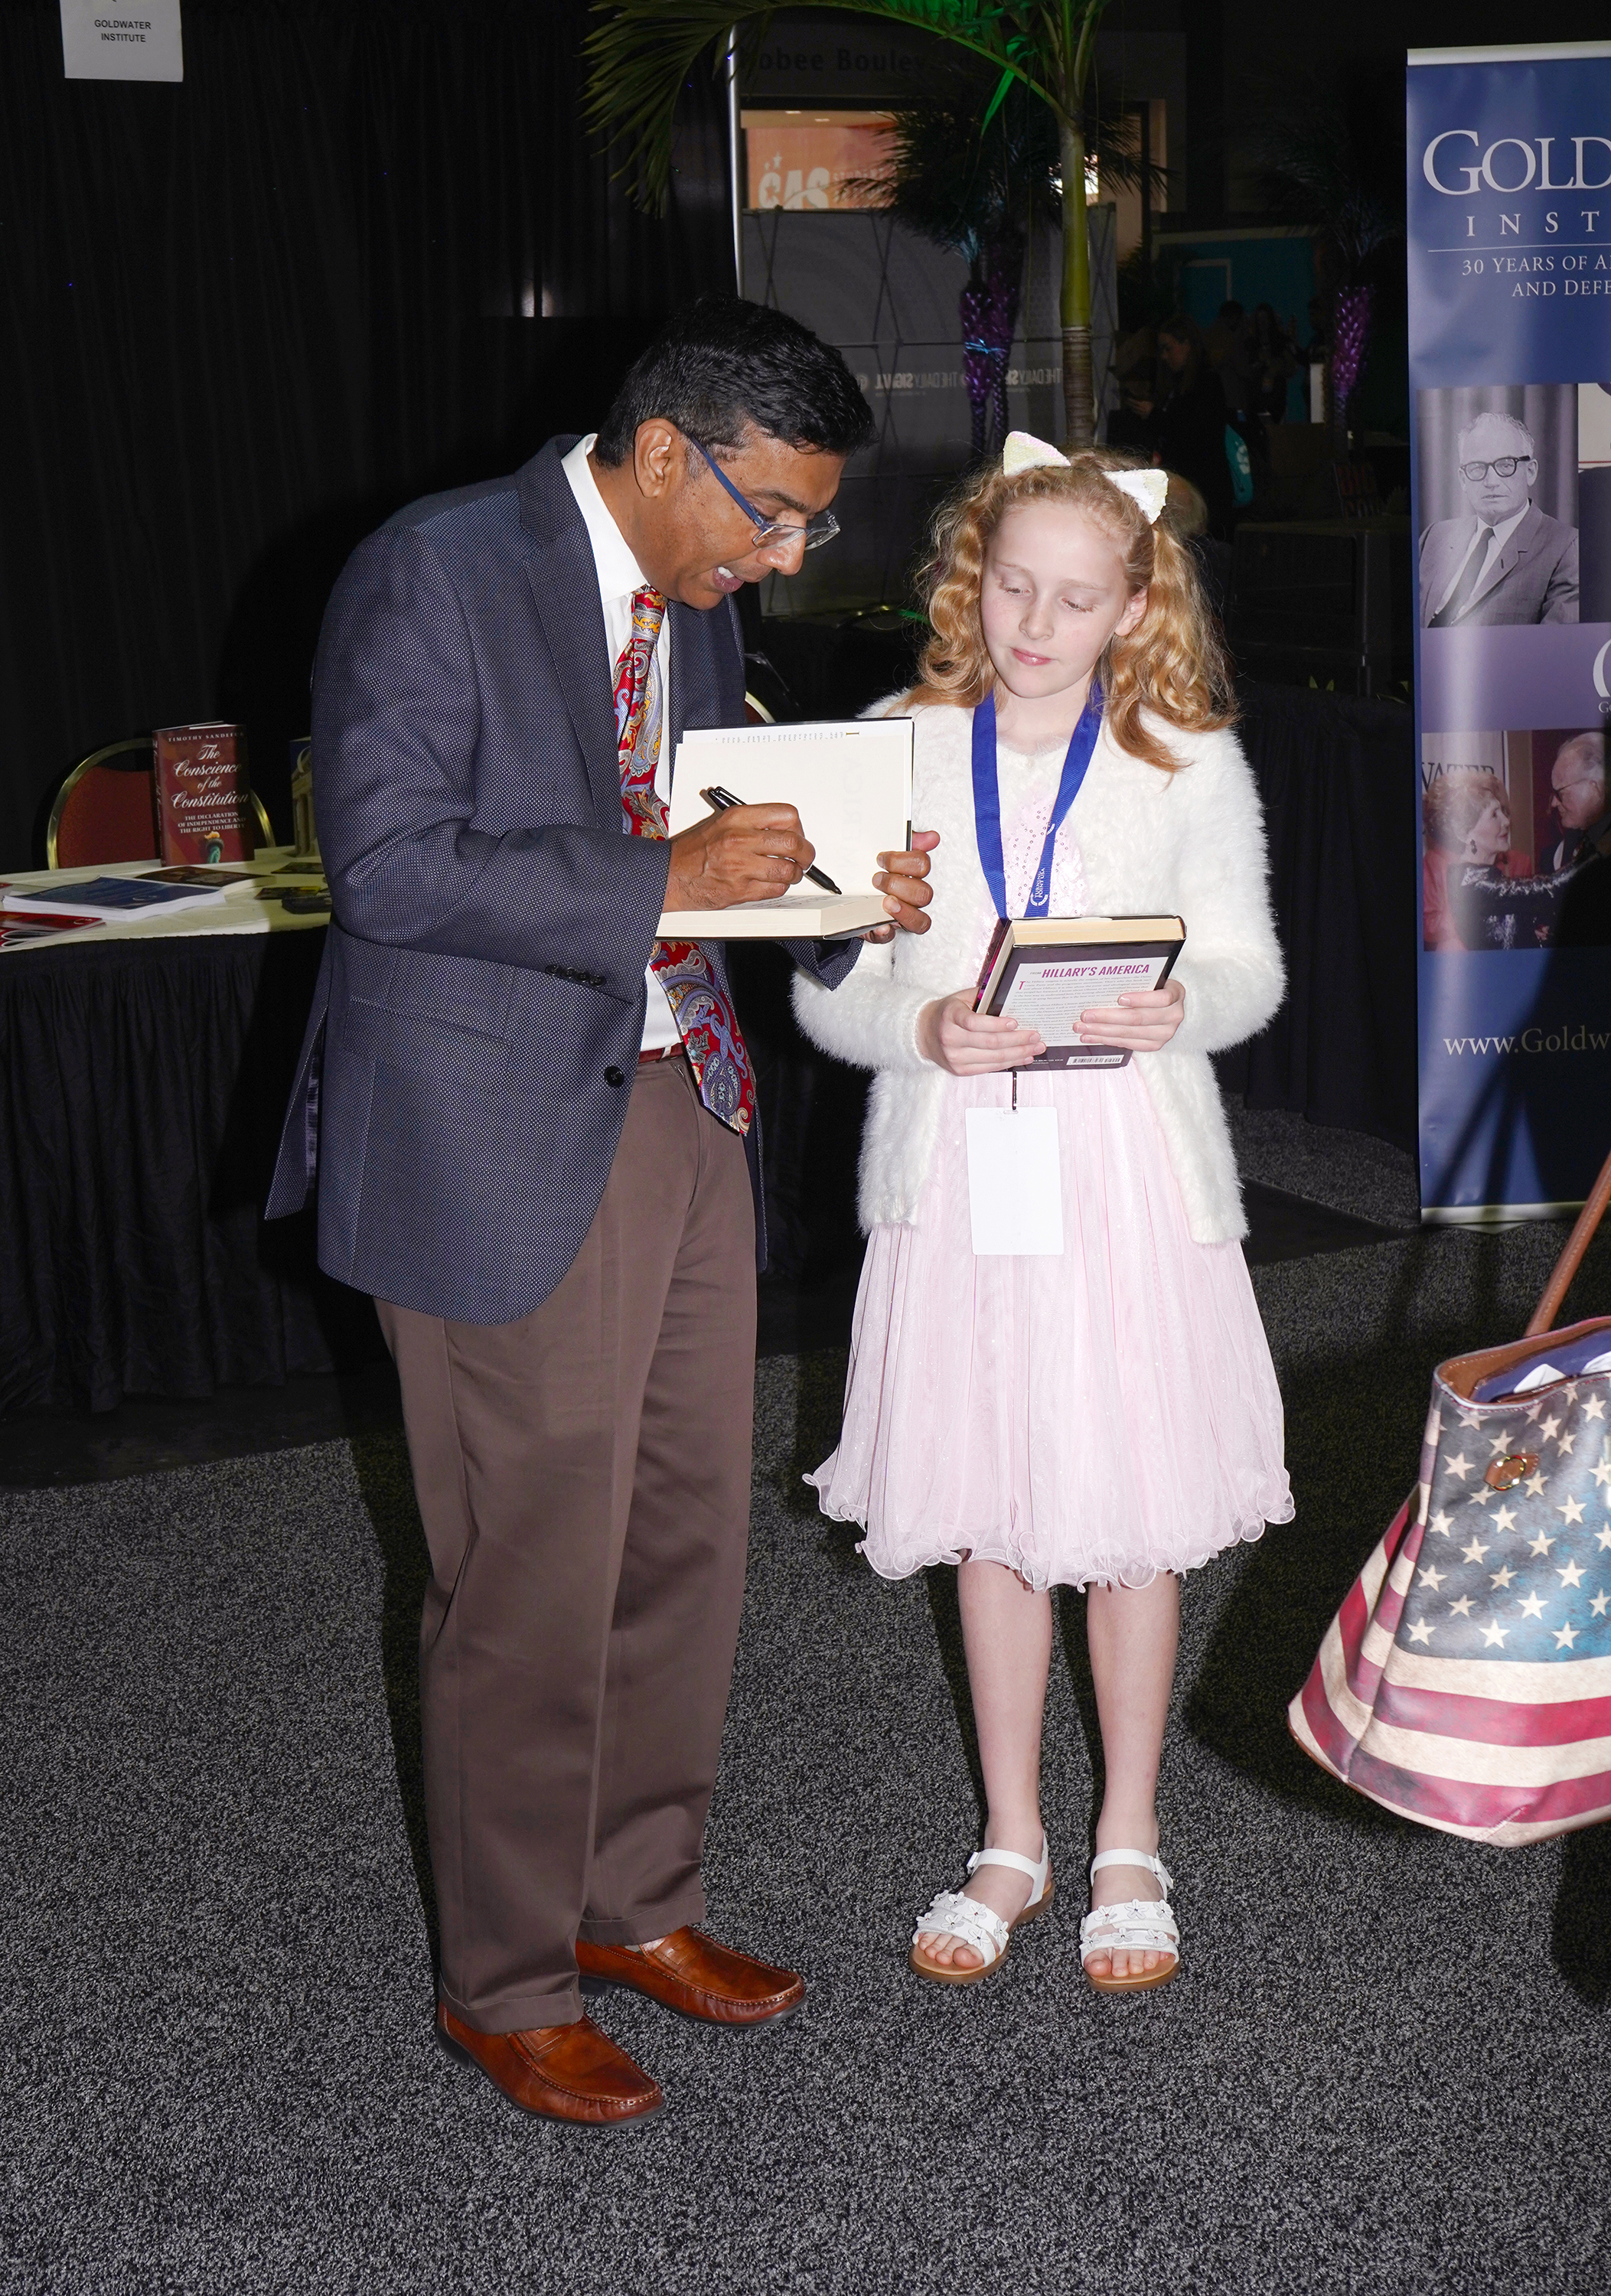 Dinesh D'Souza signs a book for a fan.